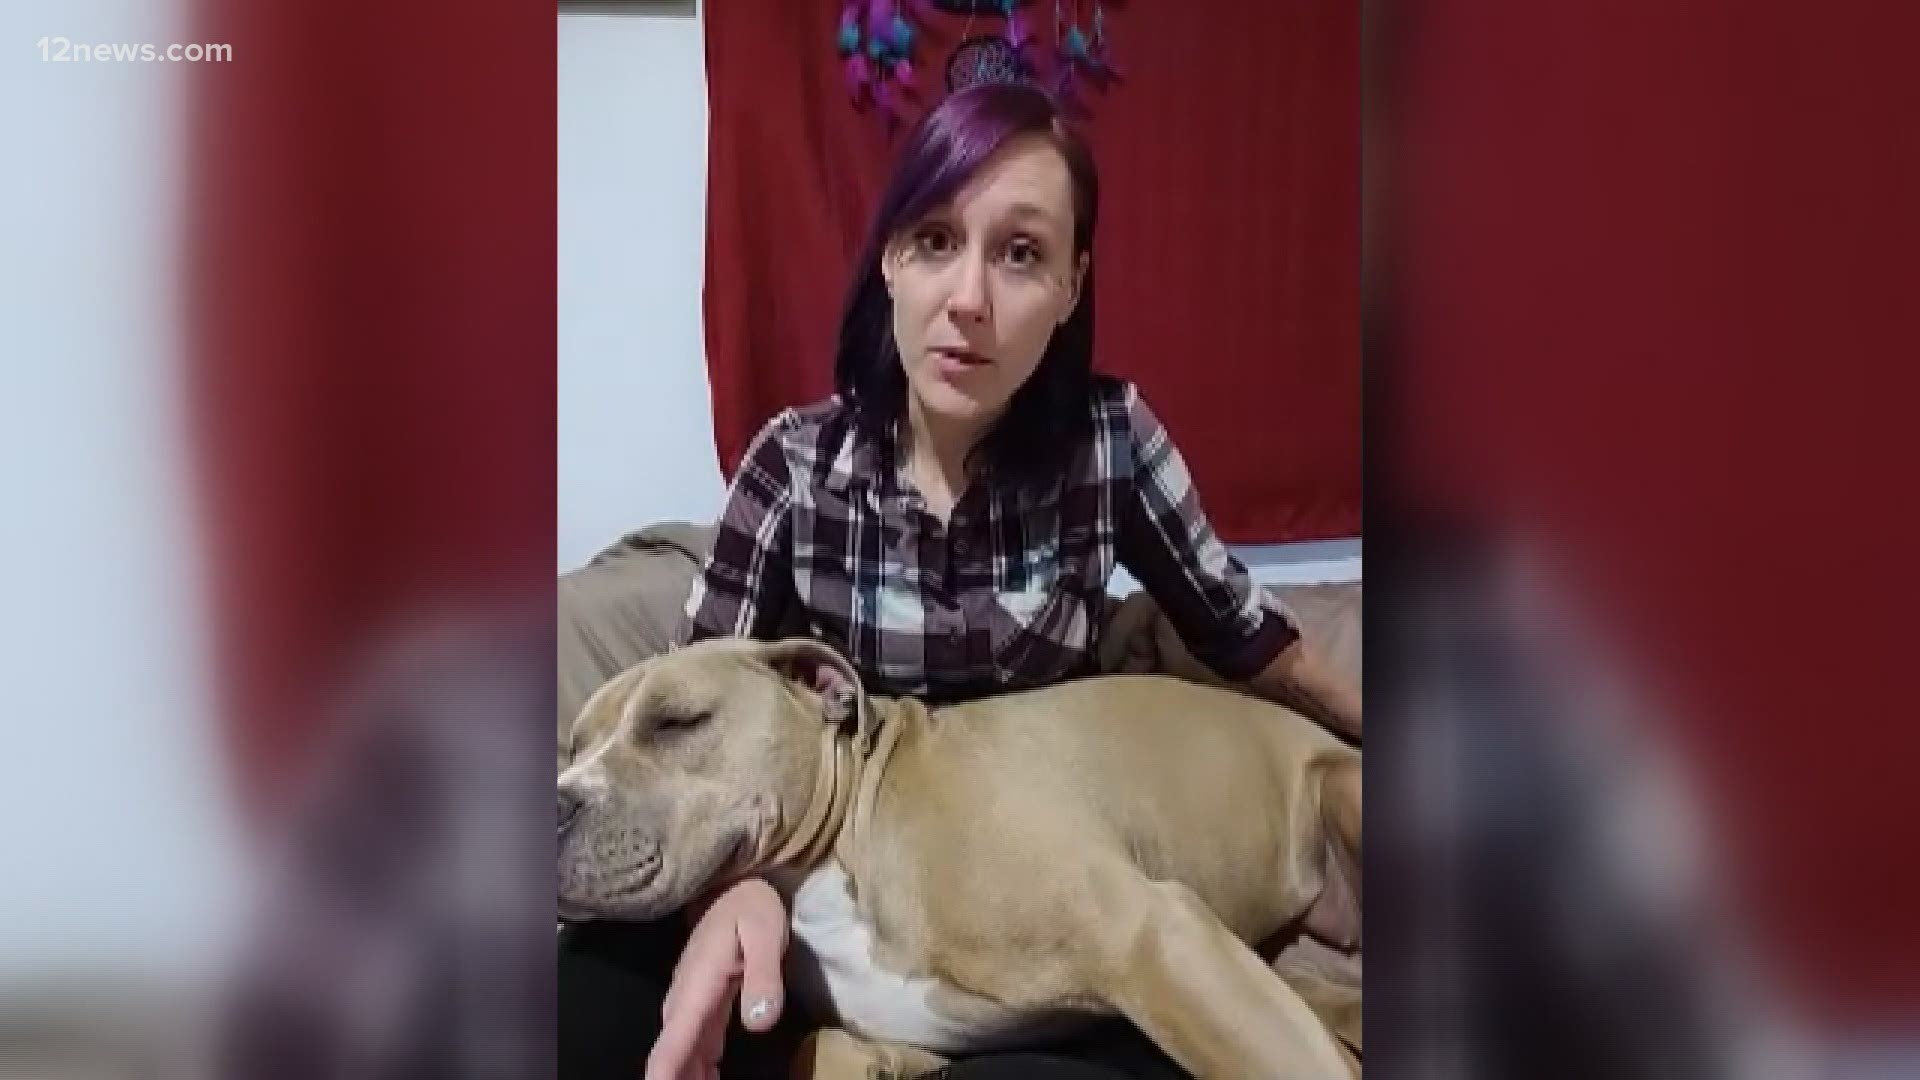 A Valley woman battling PTSD has been matched with an unlikely therapy dog in training. More info: www.cci.org. Team 12's Jen Wahl has the latest.